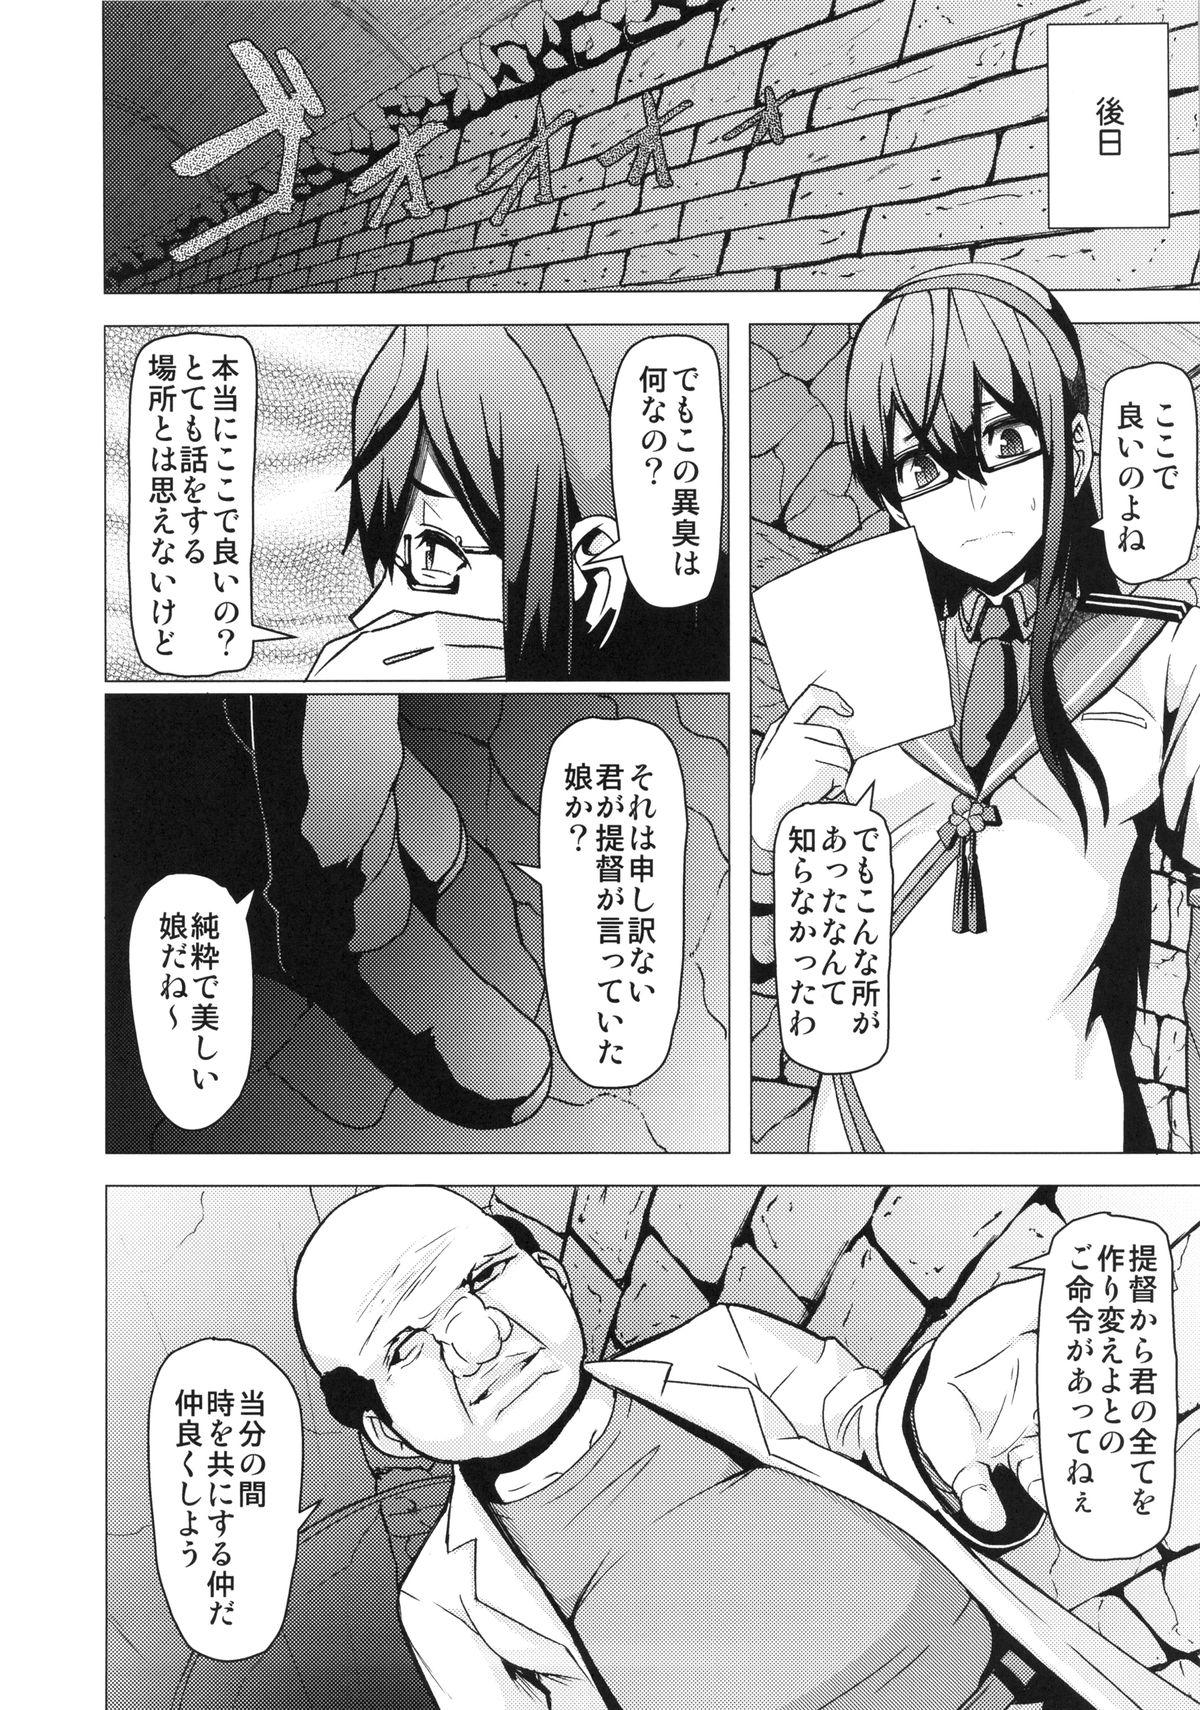 Bulge REDLEVEL13 - Kantai collection Roughsex - Page 3